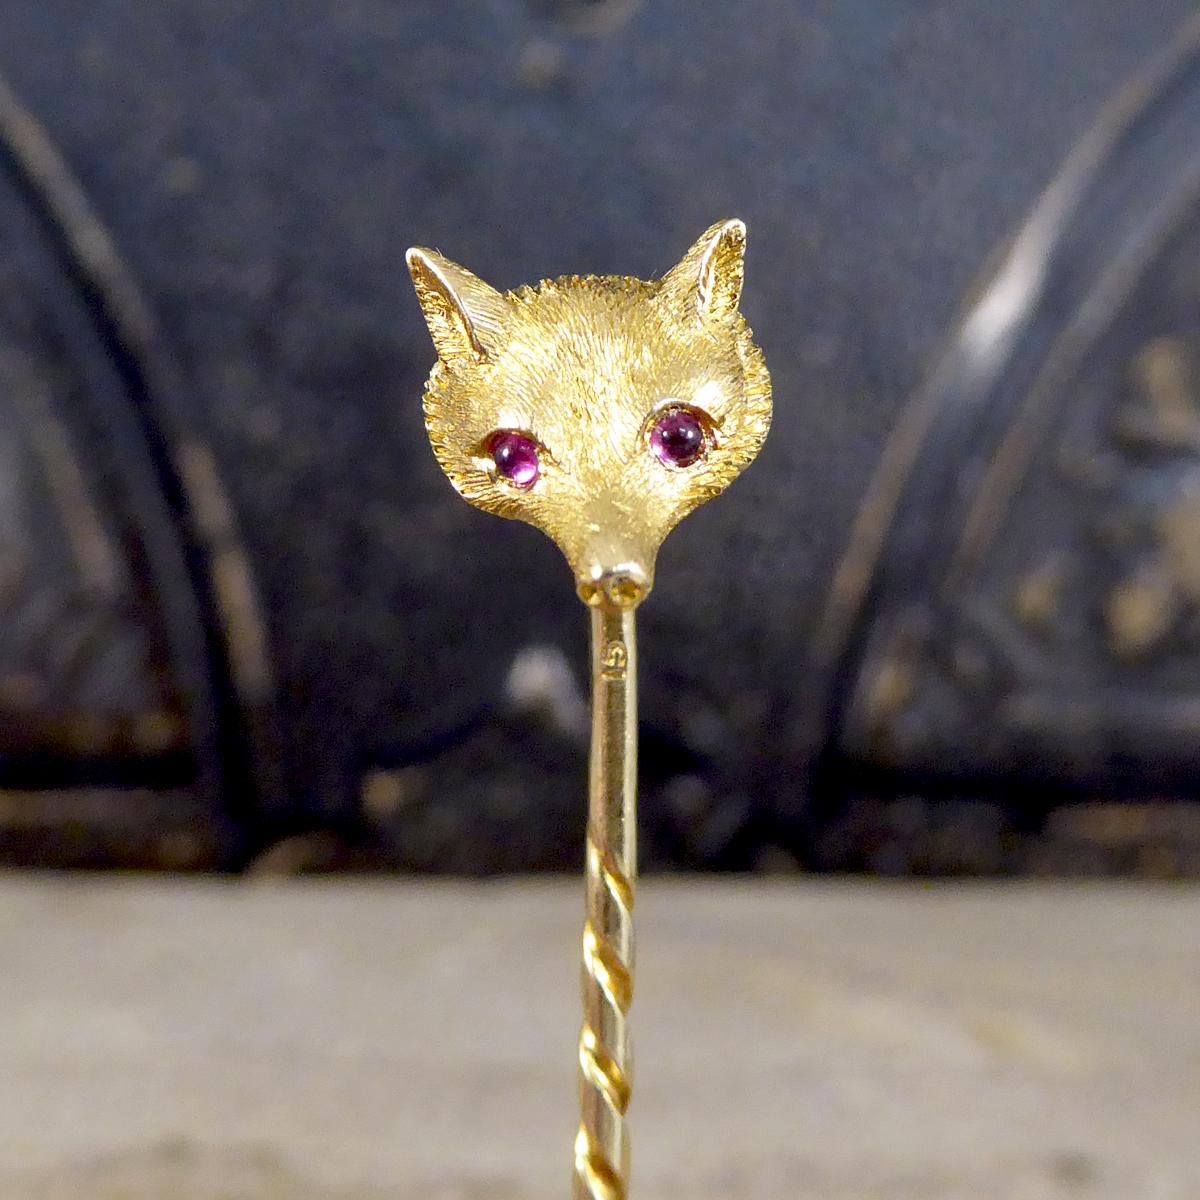 Typically used in the Edwardian era as a pin or brooch whilst hunting, this Fox Head has been hand crafted in 18ct Yellow Gold, with Cabochon Ruby set eyes. This 15ct Yellow Gold antique pin shows such quality craftsmanship with great detailing to